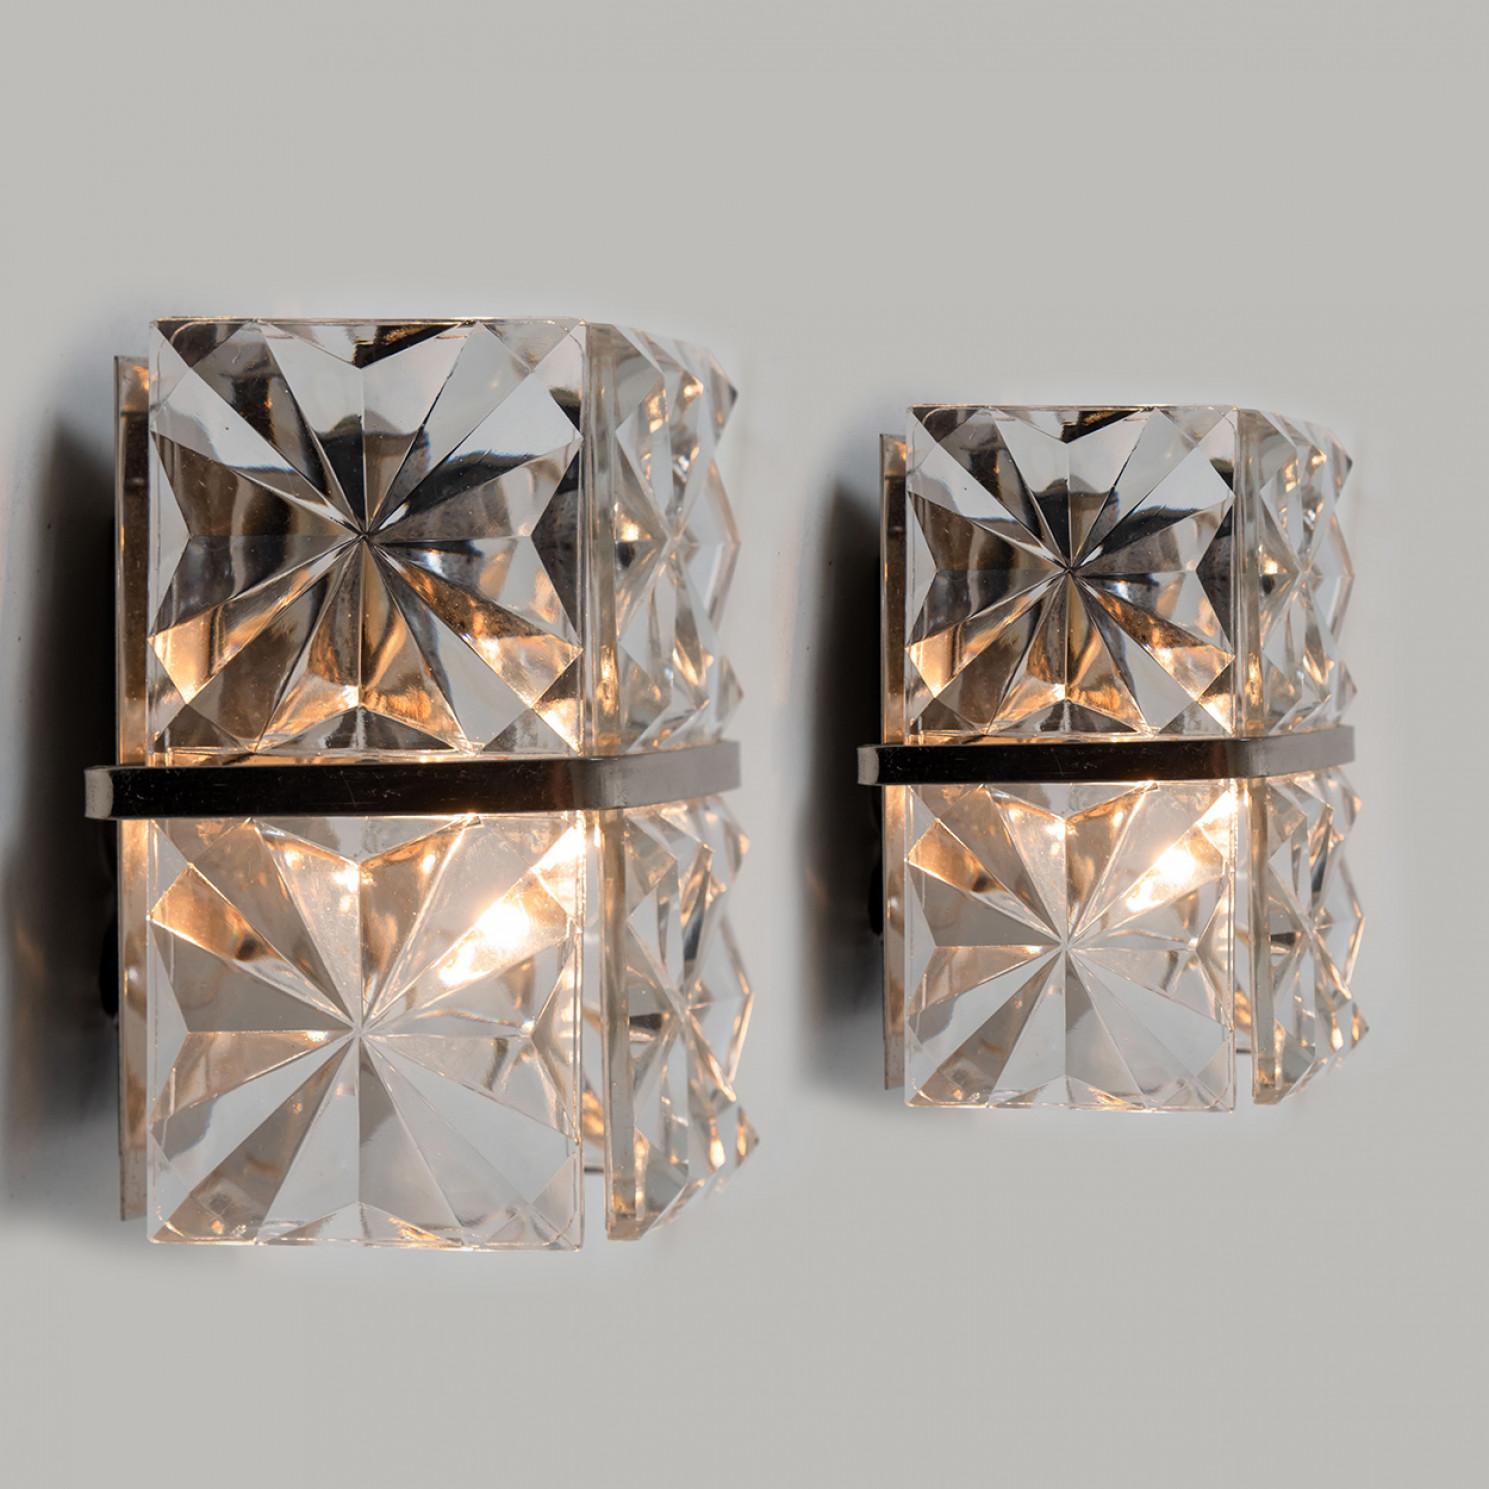 1 of the 2 luxurious of chrome frames and thick diamond crystal sconces by the famed maker, Kinkeldey. Very elegant light fixtures, comfortable with all decor periods. The crystals are meticulously cut in such a way that radiate the light of the